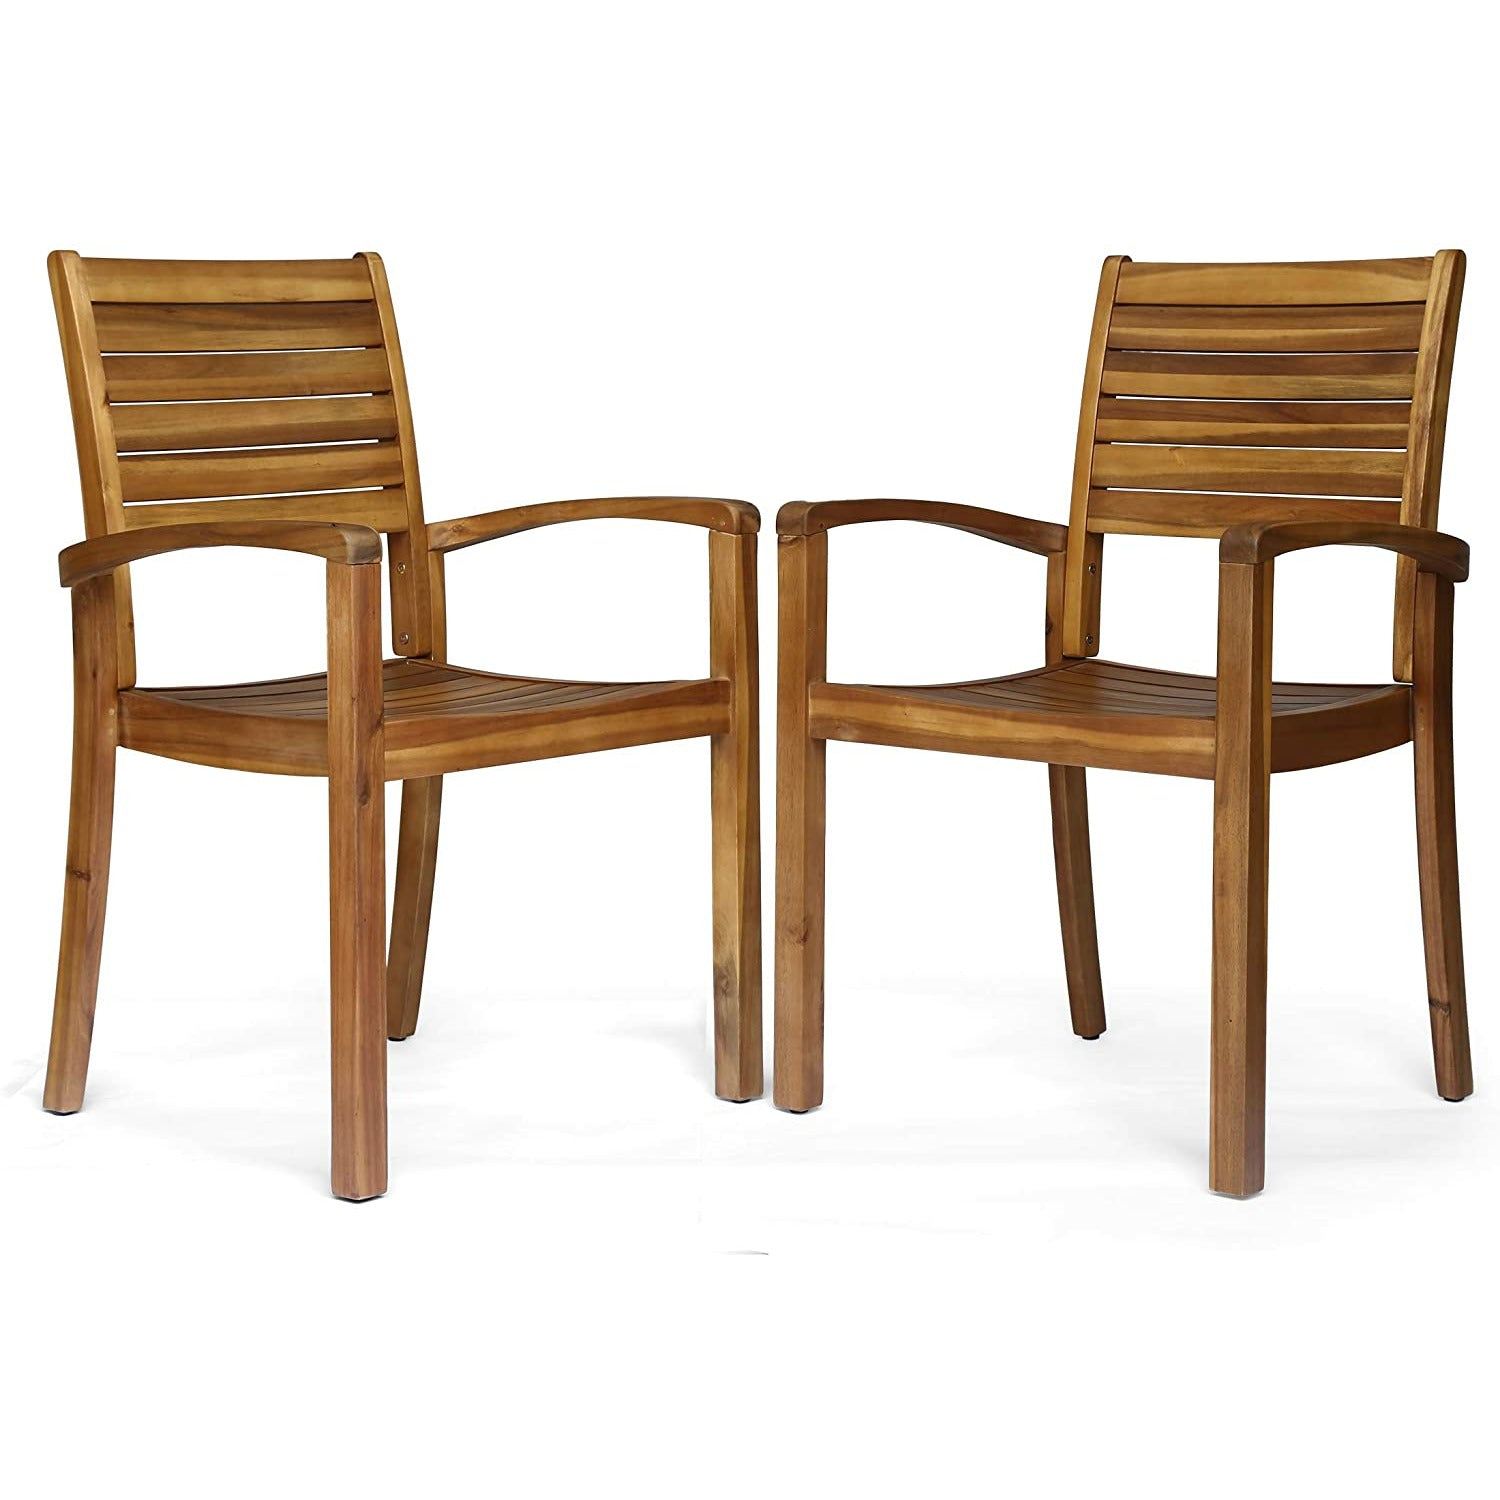 Christopher Knight Home 306431 Watts Outdoor Acacia Wood Dining Chairs, Teak Finish (Set of 2)